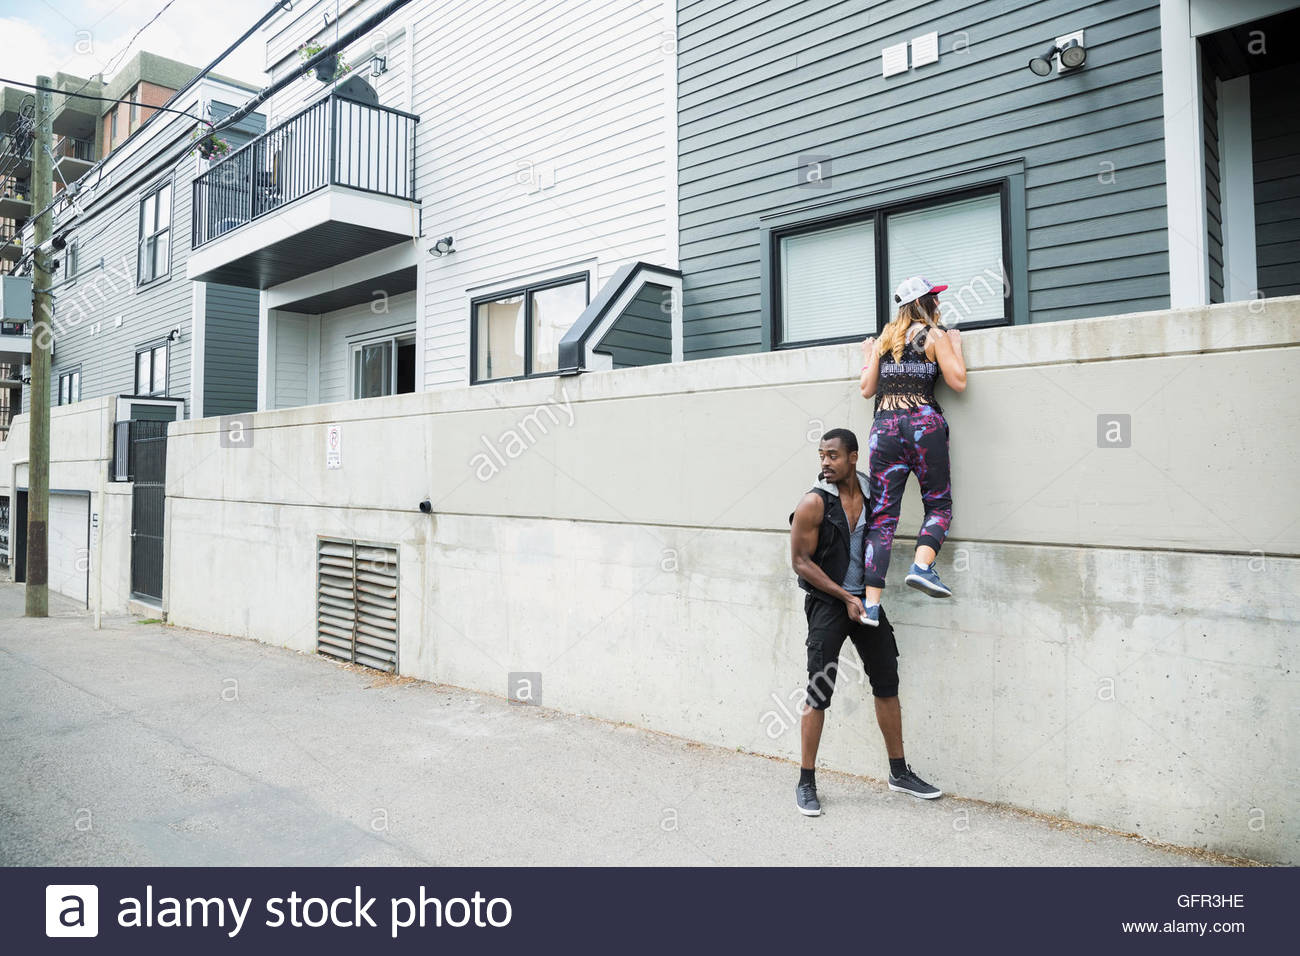 Suspicious young man lifting young woman over urban wall Stock Photo